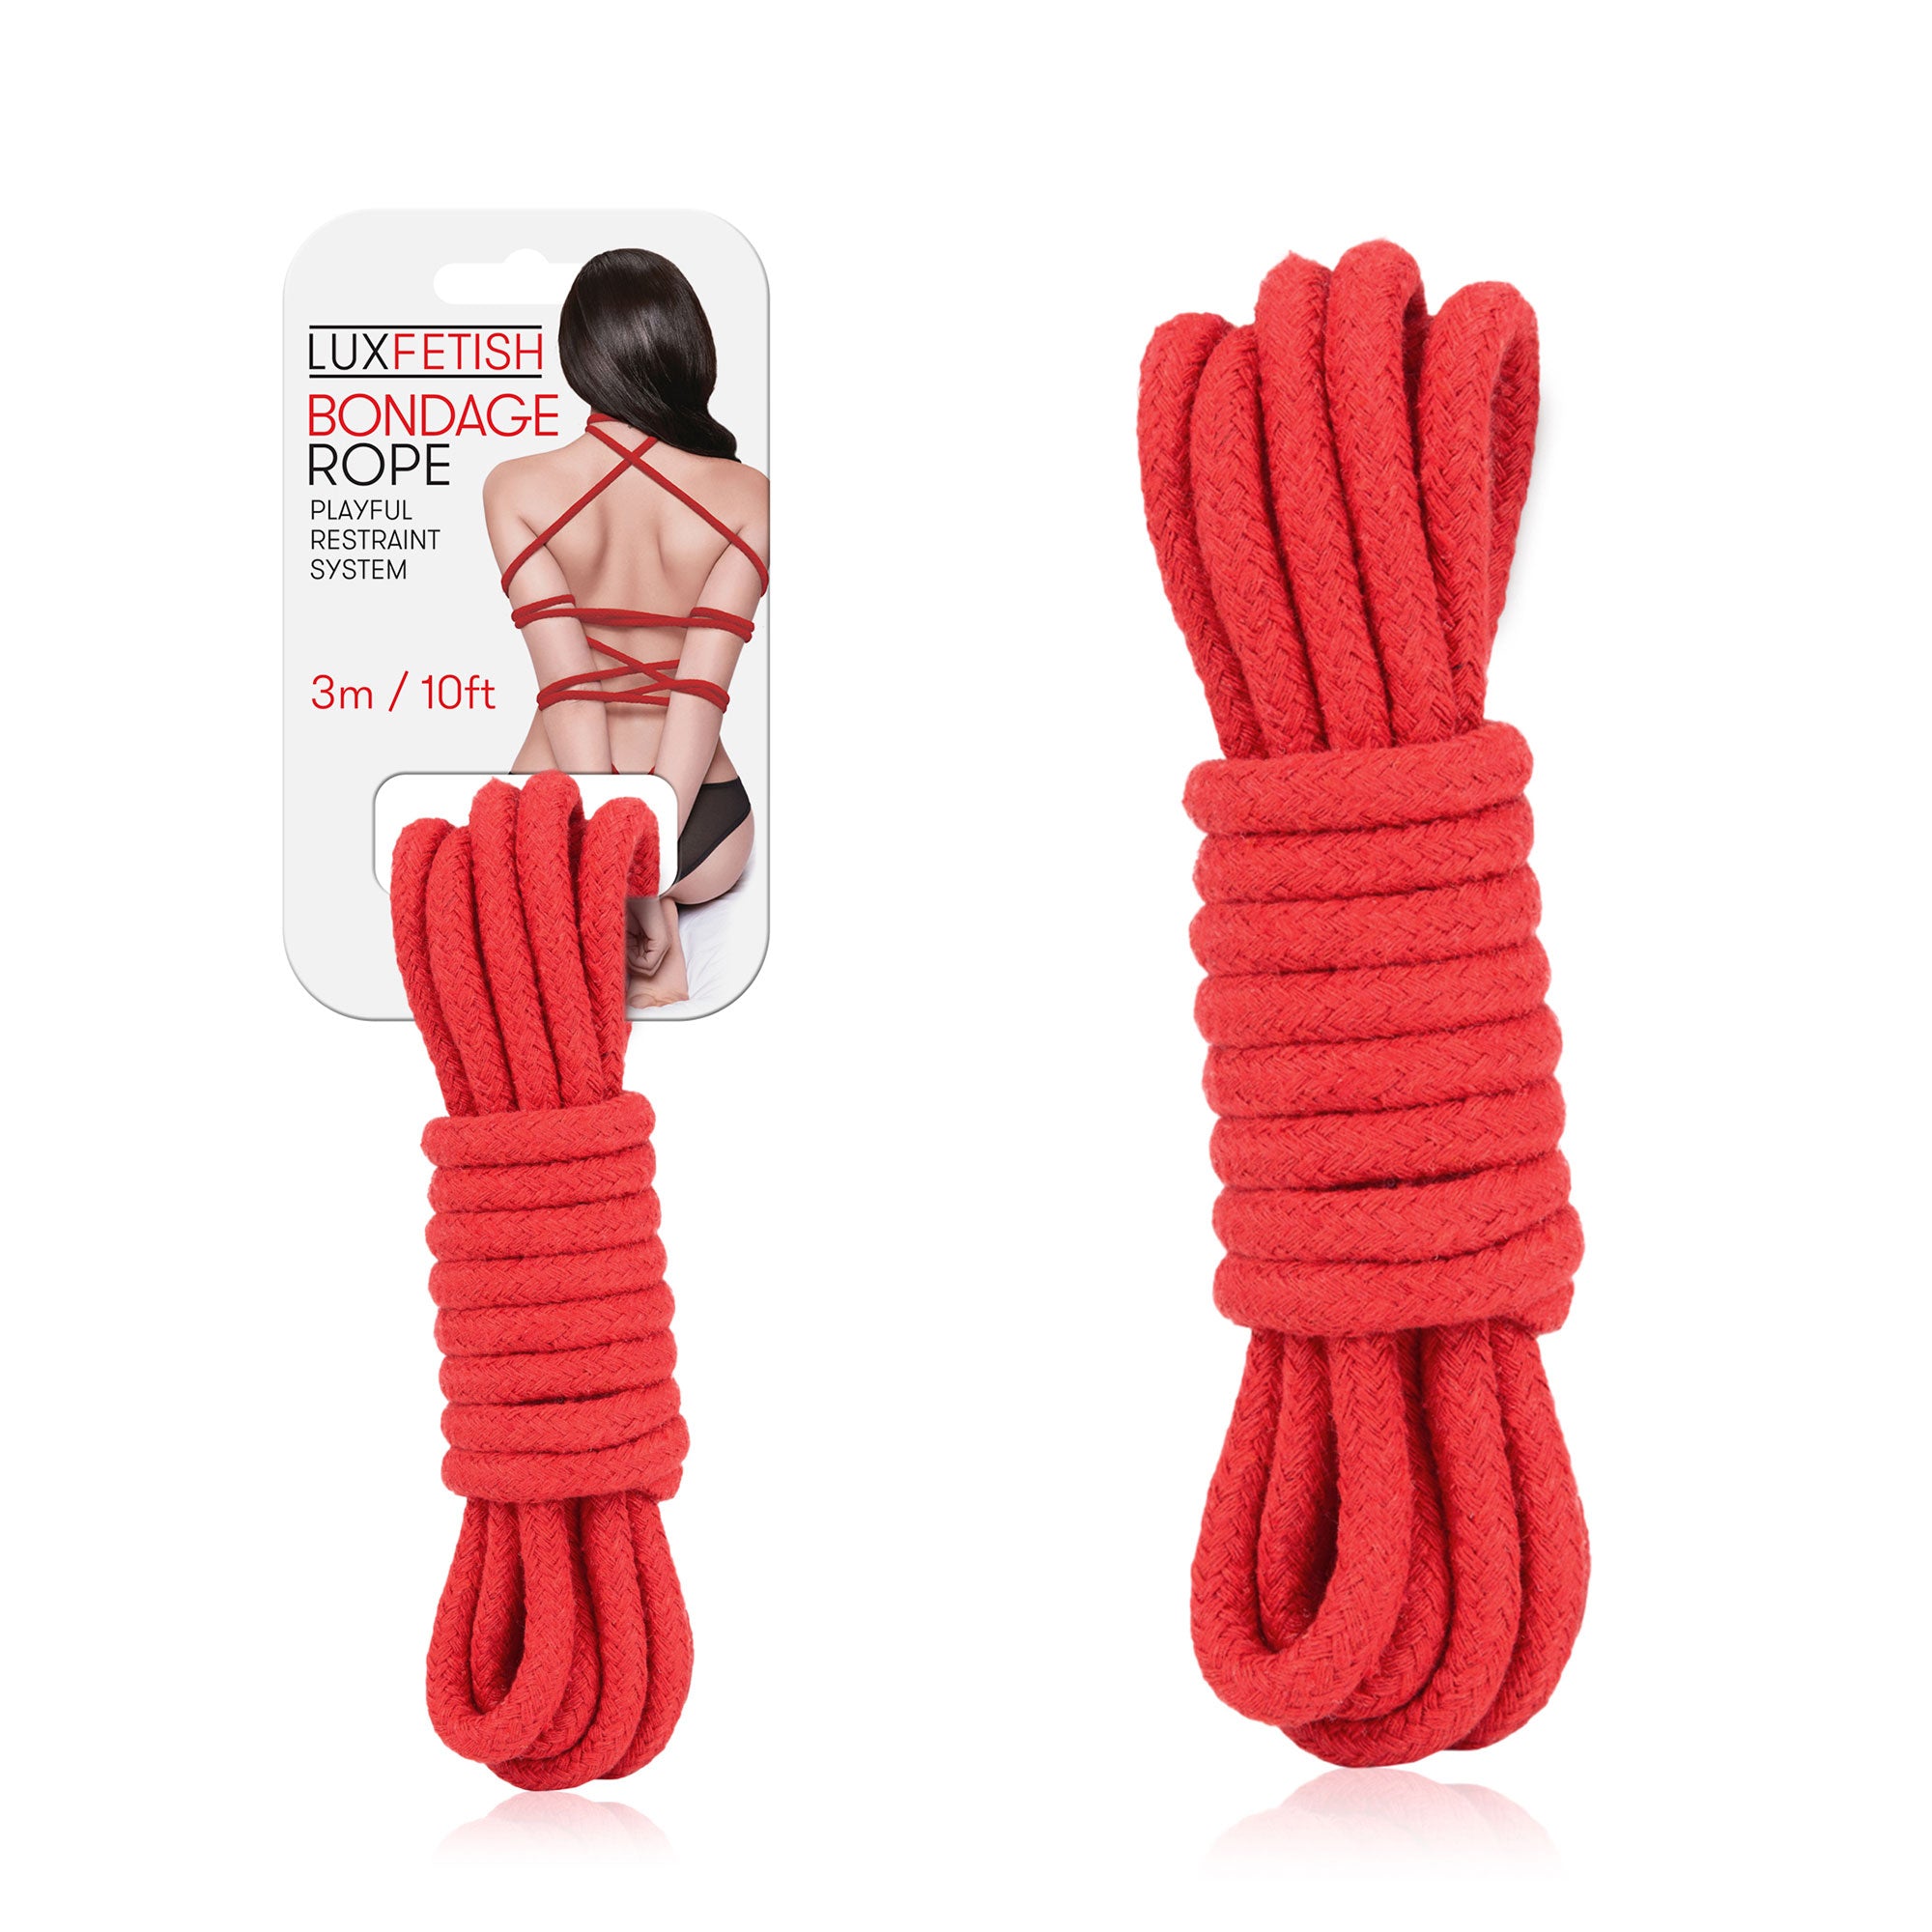 Packaging of Lux Fetish Bondage Rope (3m / 10ft) - Red at glastoy.com